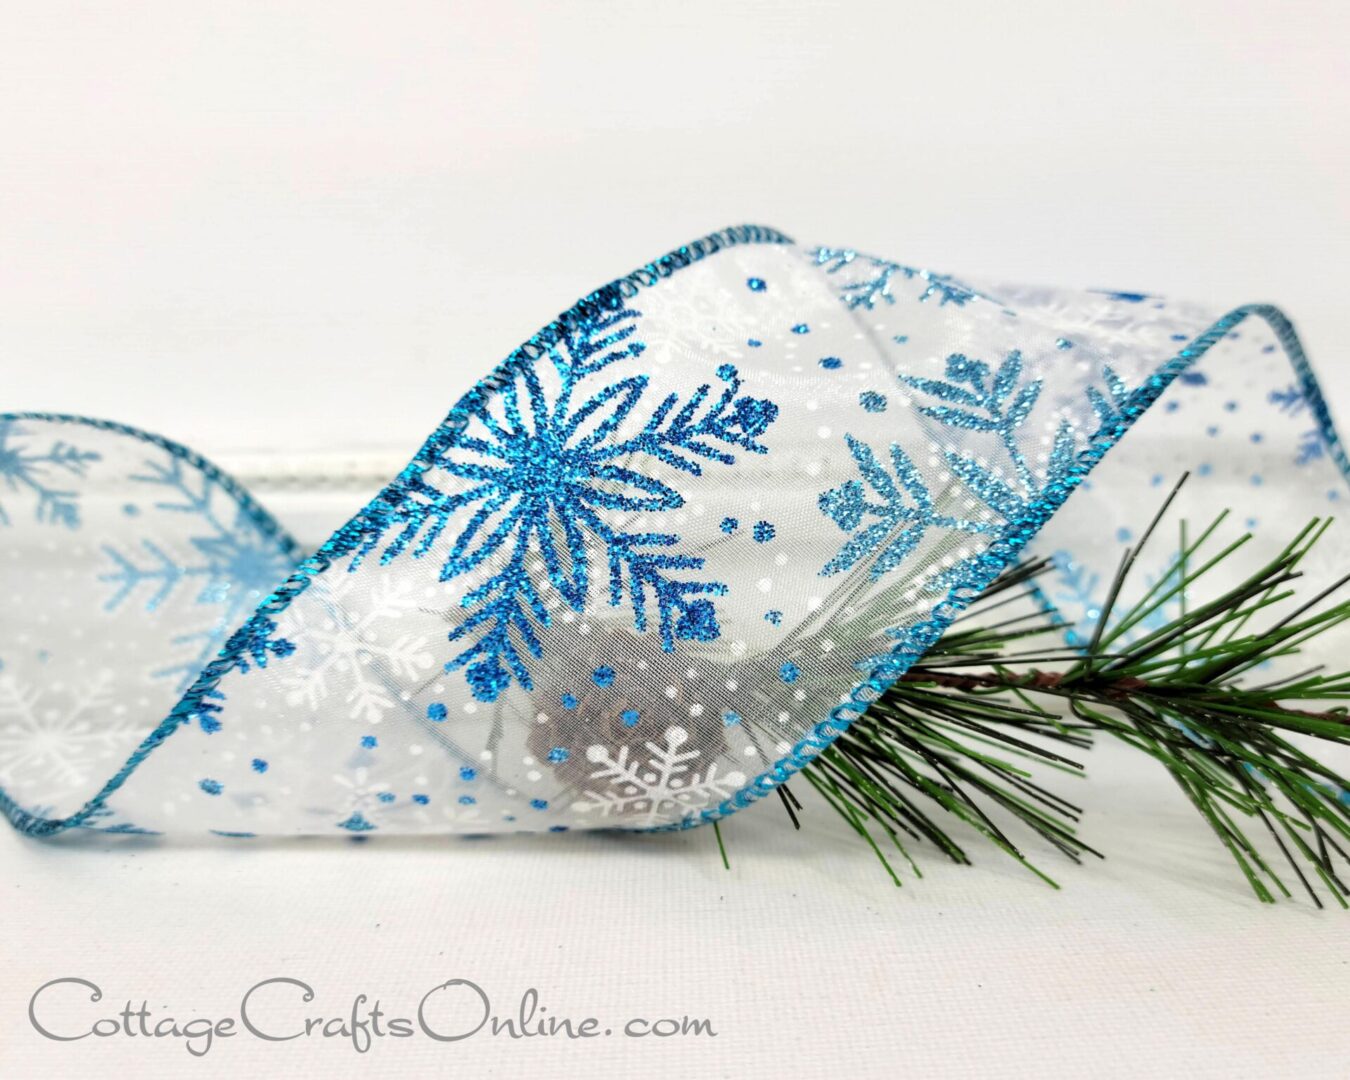 A close up of a ribbon with blue snowflakes